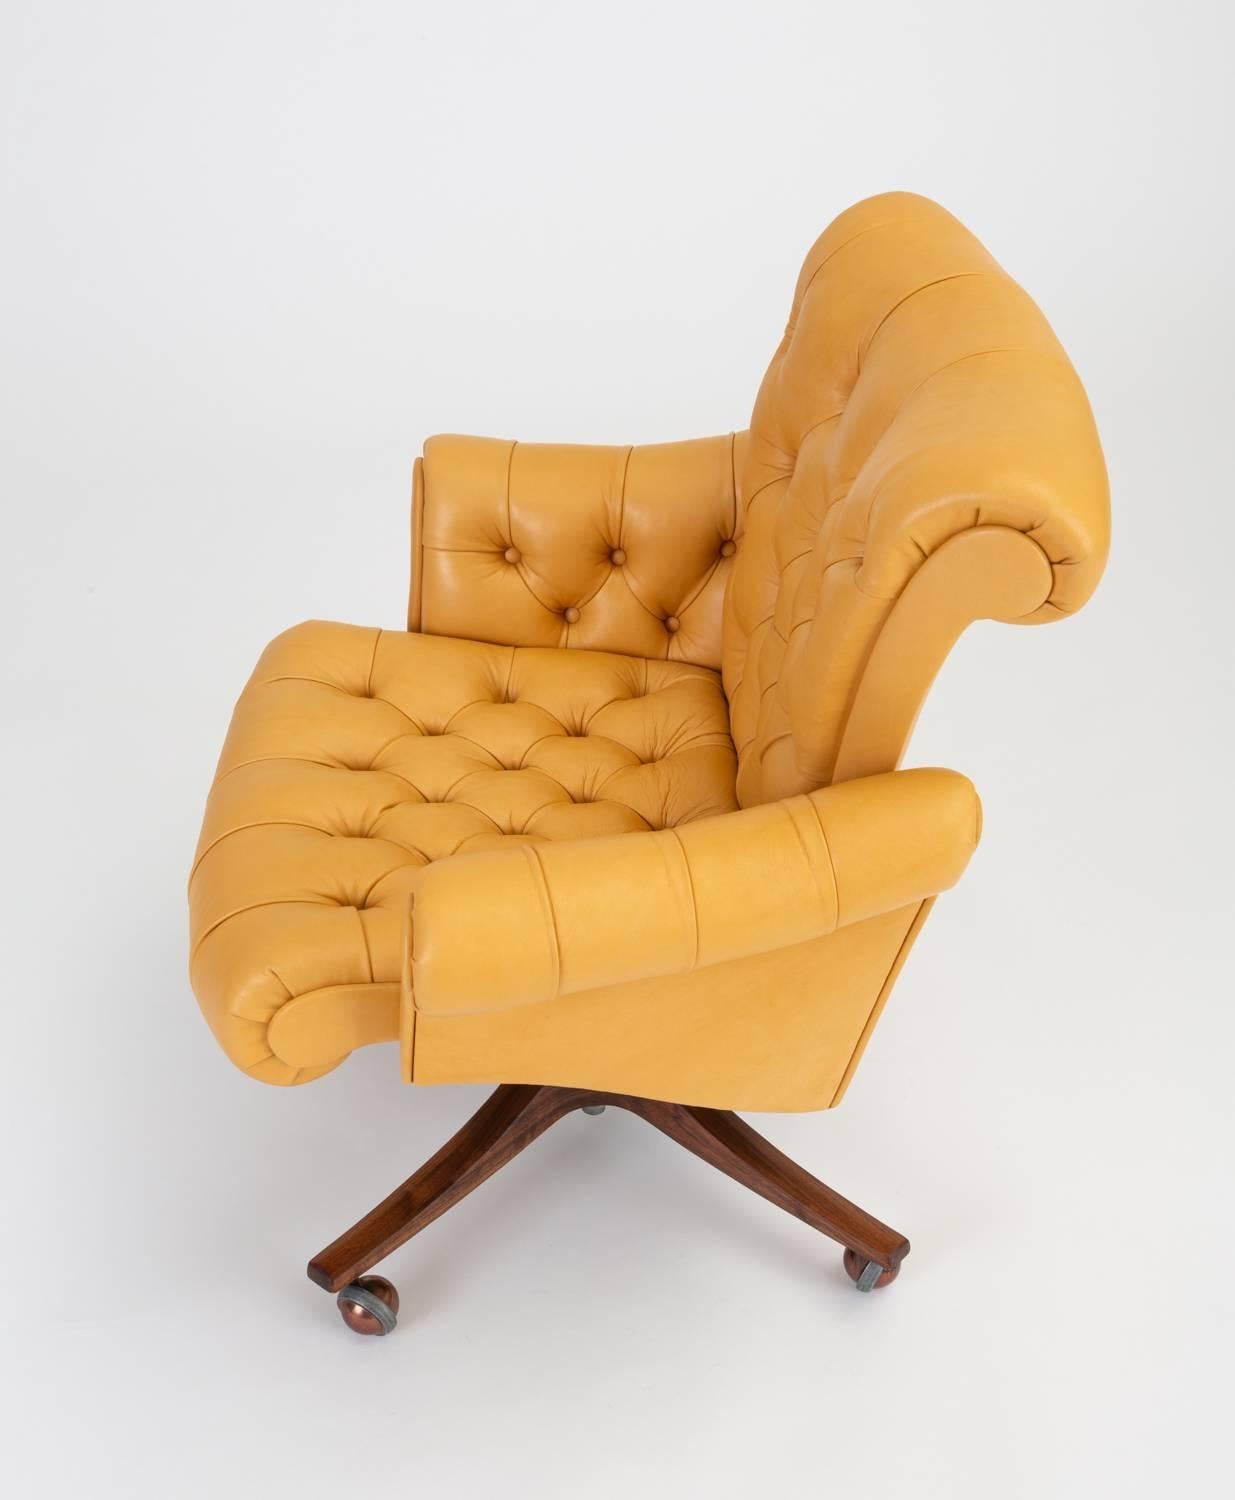 Model 932 “In Clover” Executive Office Chair by Edward Wormley for Dunbar 5